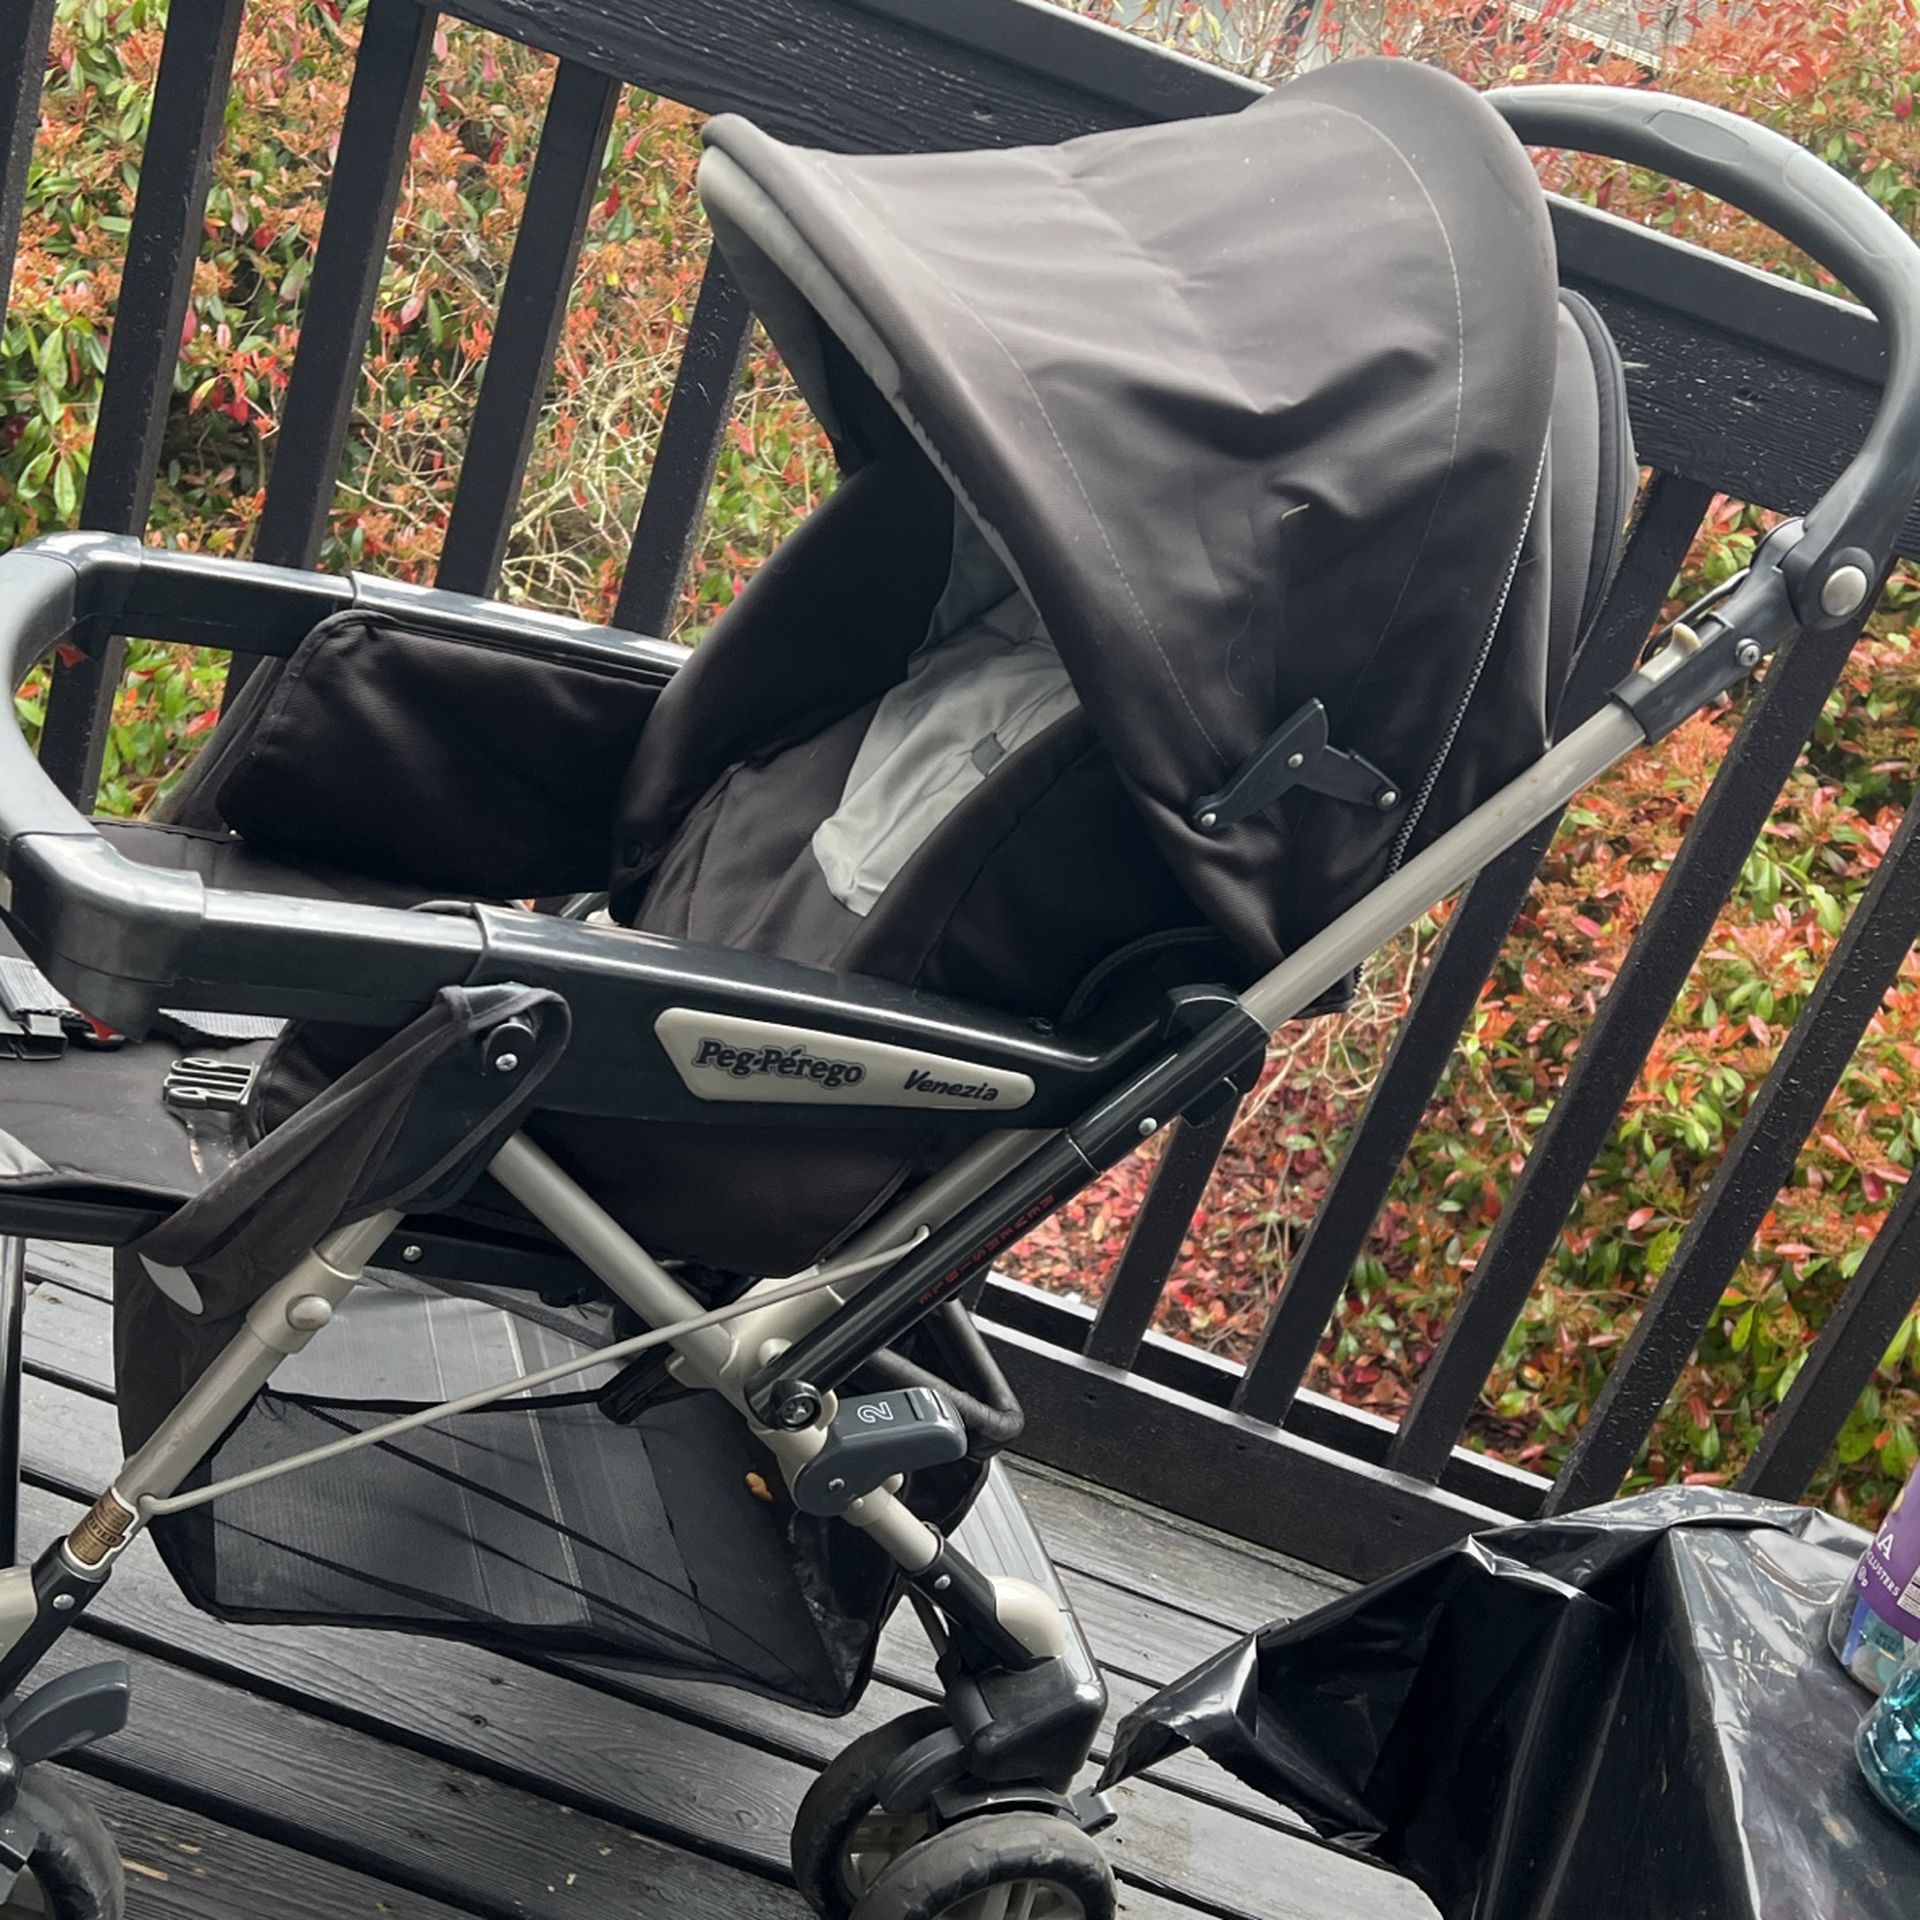 Baby Stroller Also Has A Place Where Your Toddler Or Young Child Can Stand Up In